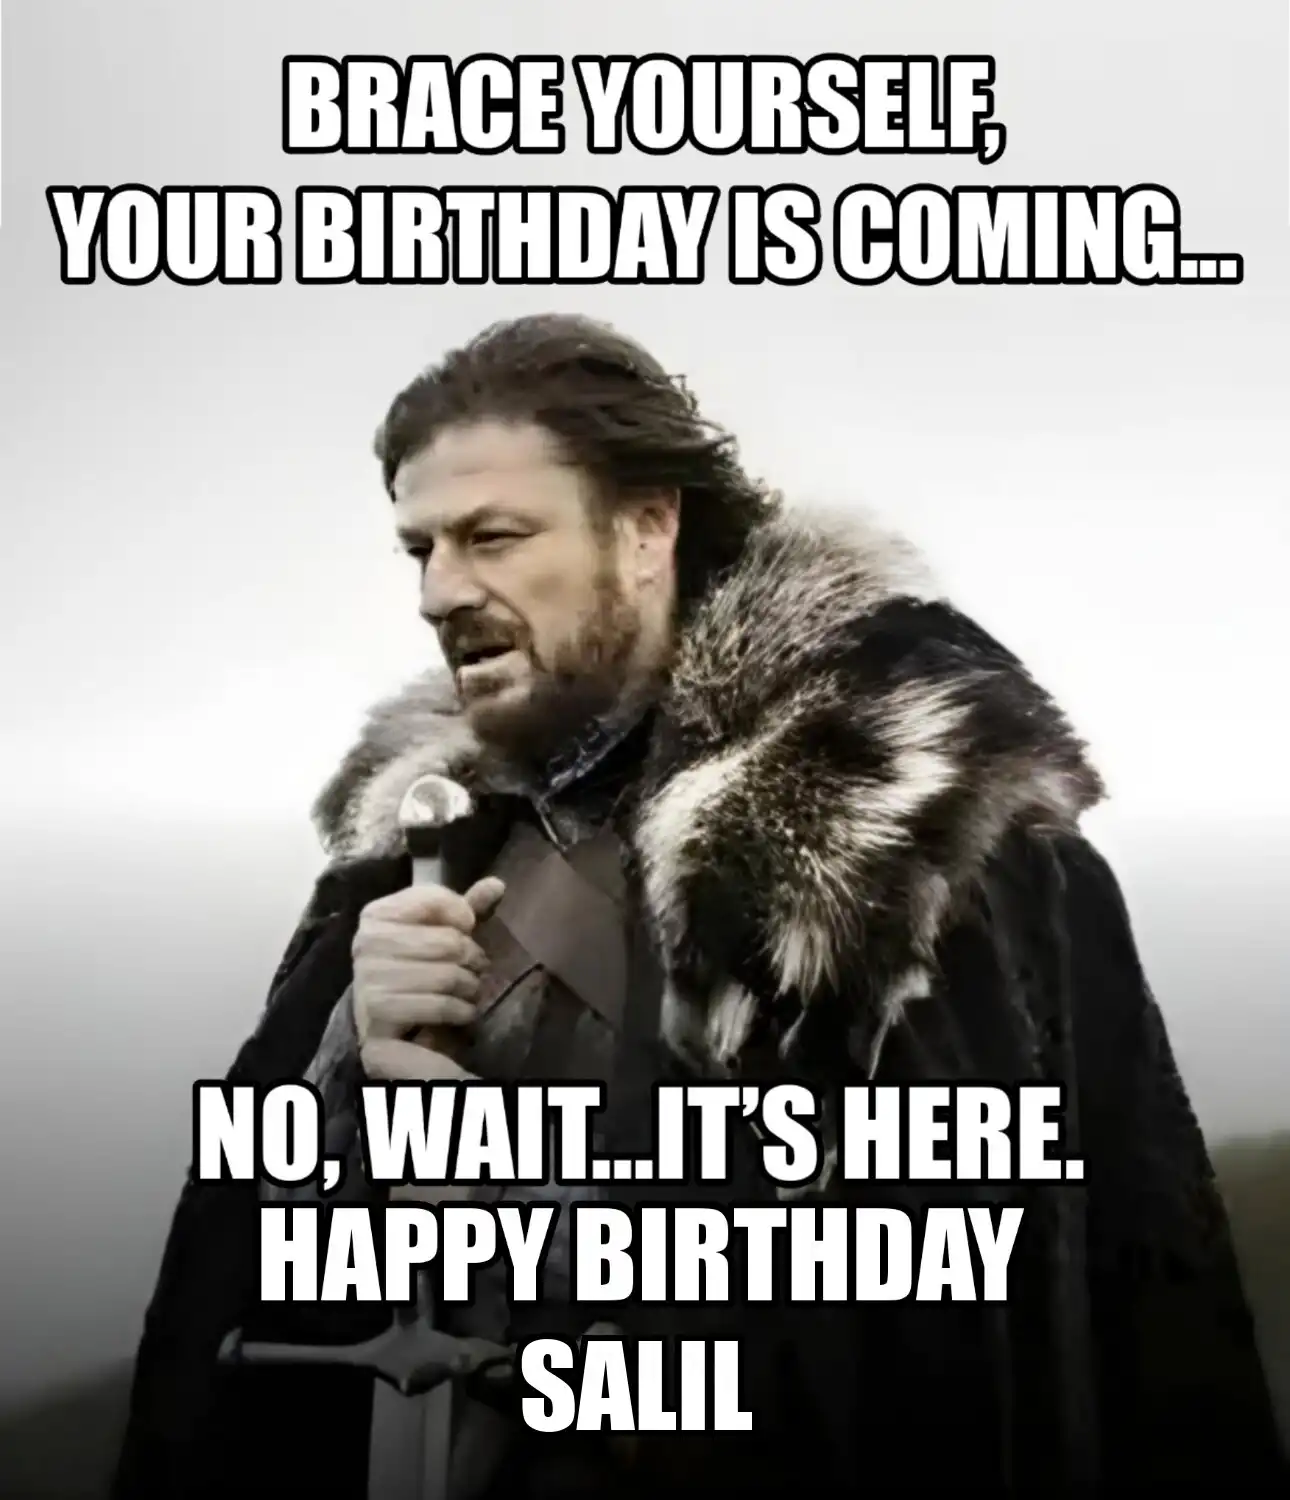 Happy Birthday Salil Brace Yourself Your Birthday Is Coming Meme